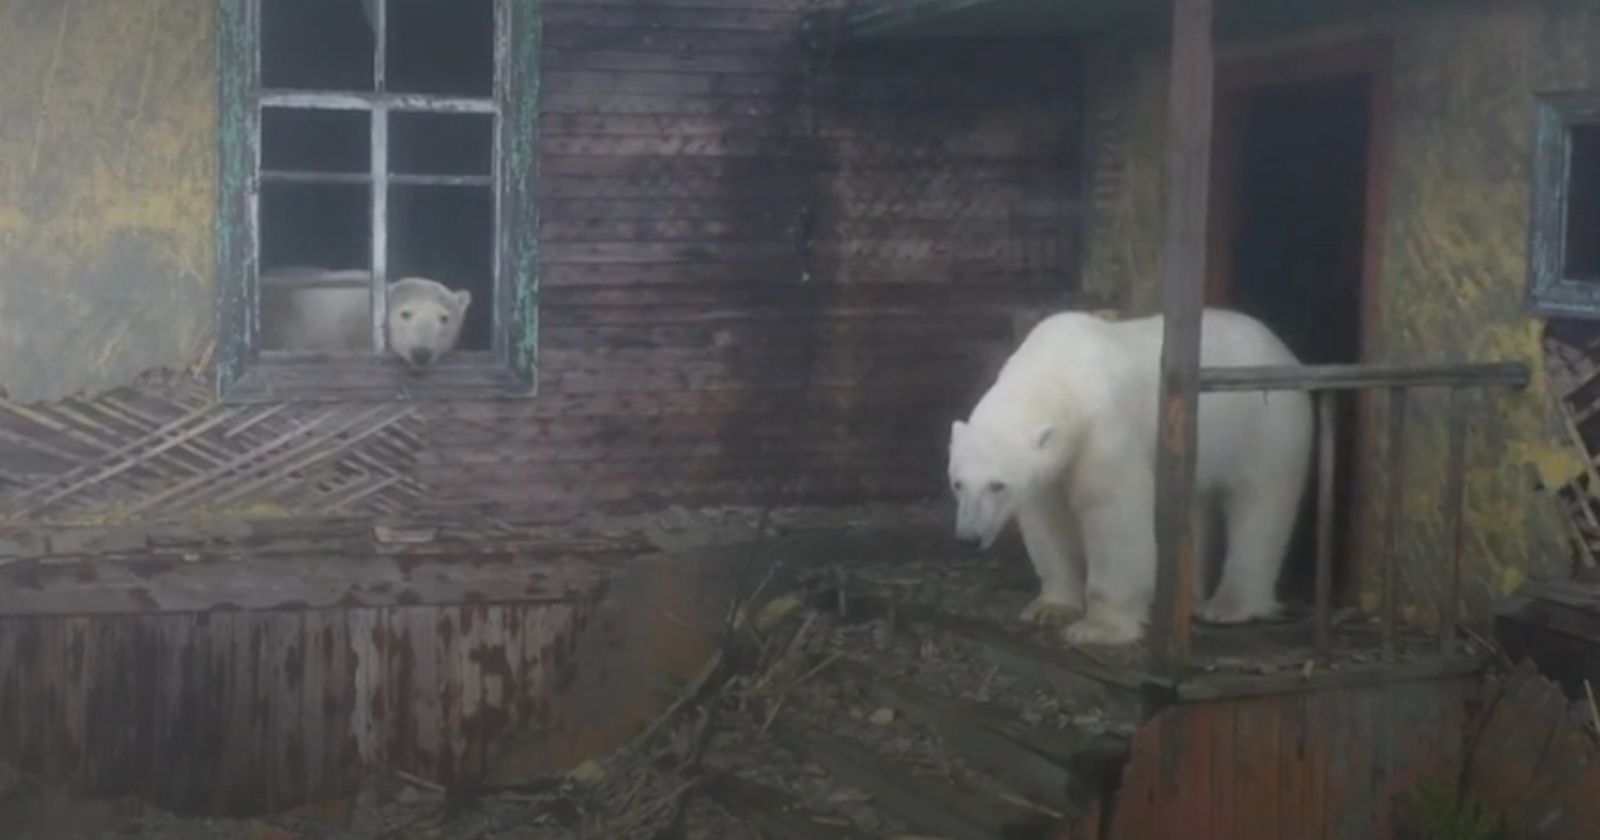 Polar bears have taken up residence in an abandoned Russian station: images that pose a challenge